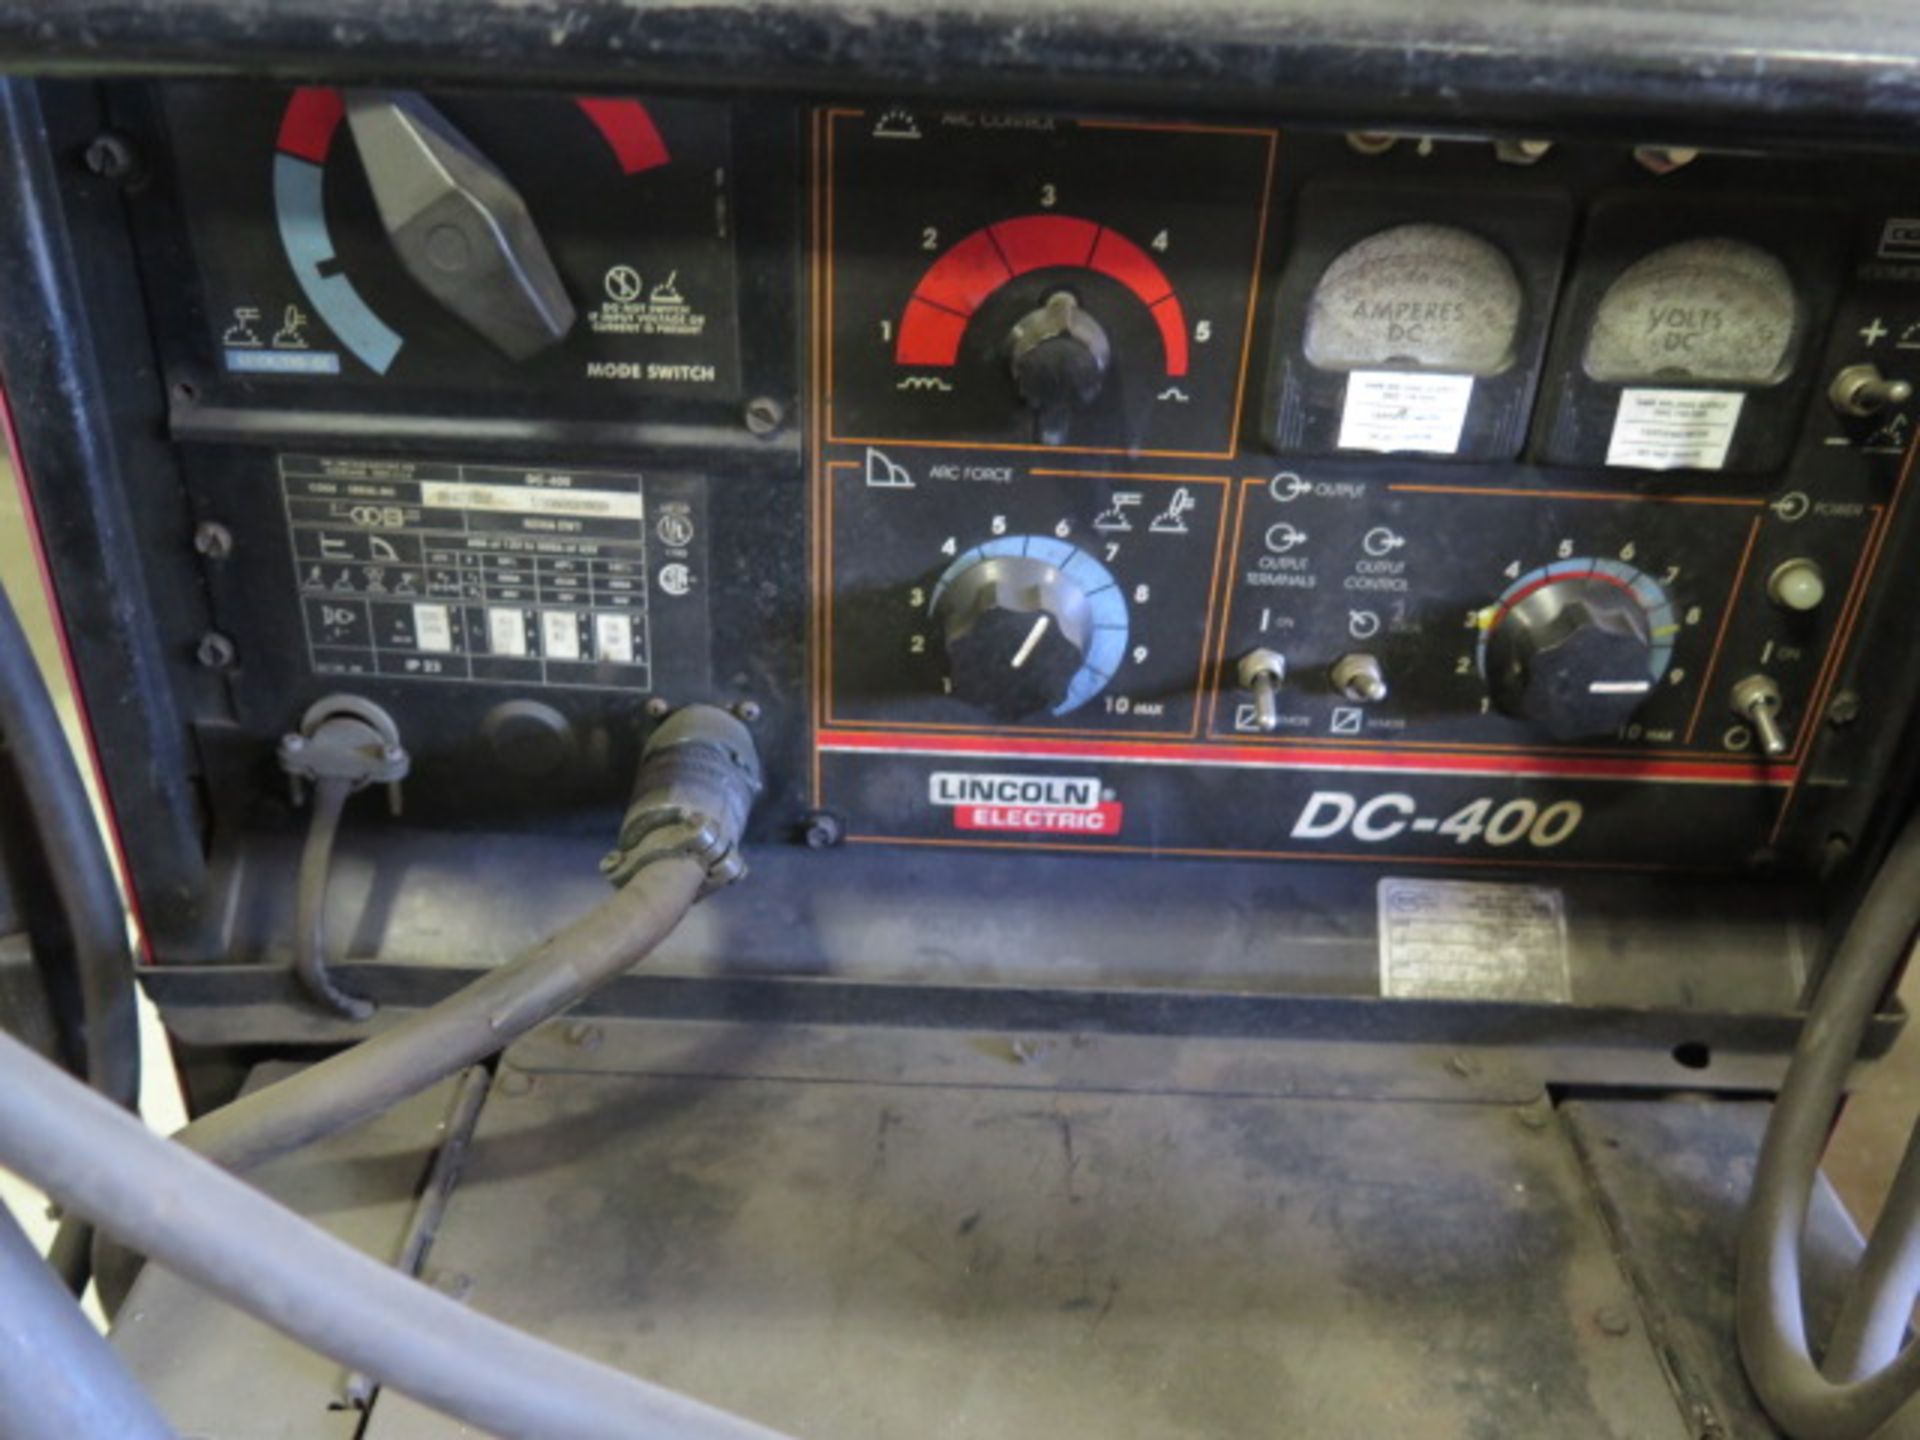 Lincoln DC-400 DC Arc Welding Power Source s/n U1060510939 w/ Lincoln Multi-Process Switch, - Image 7 of 7